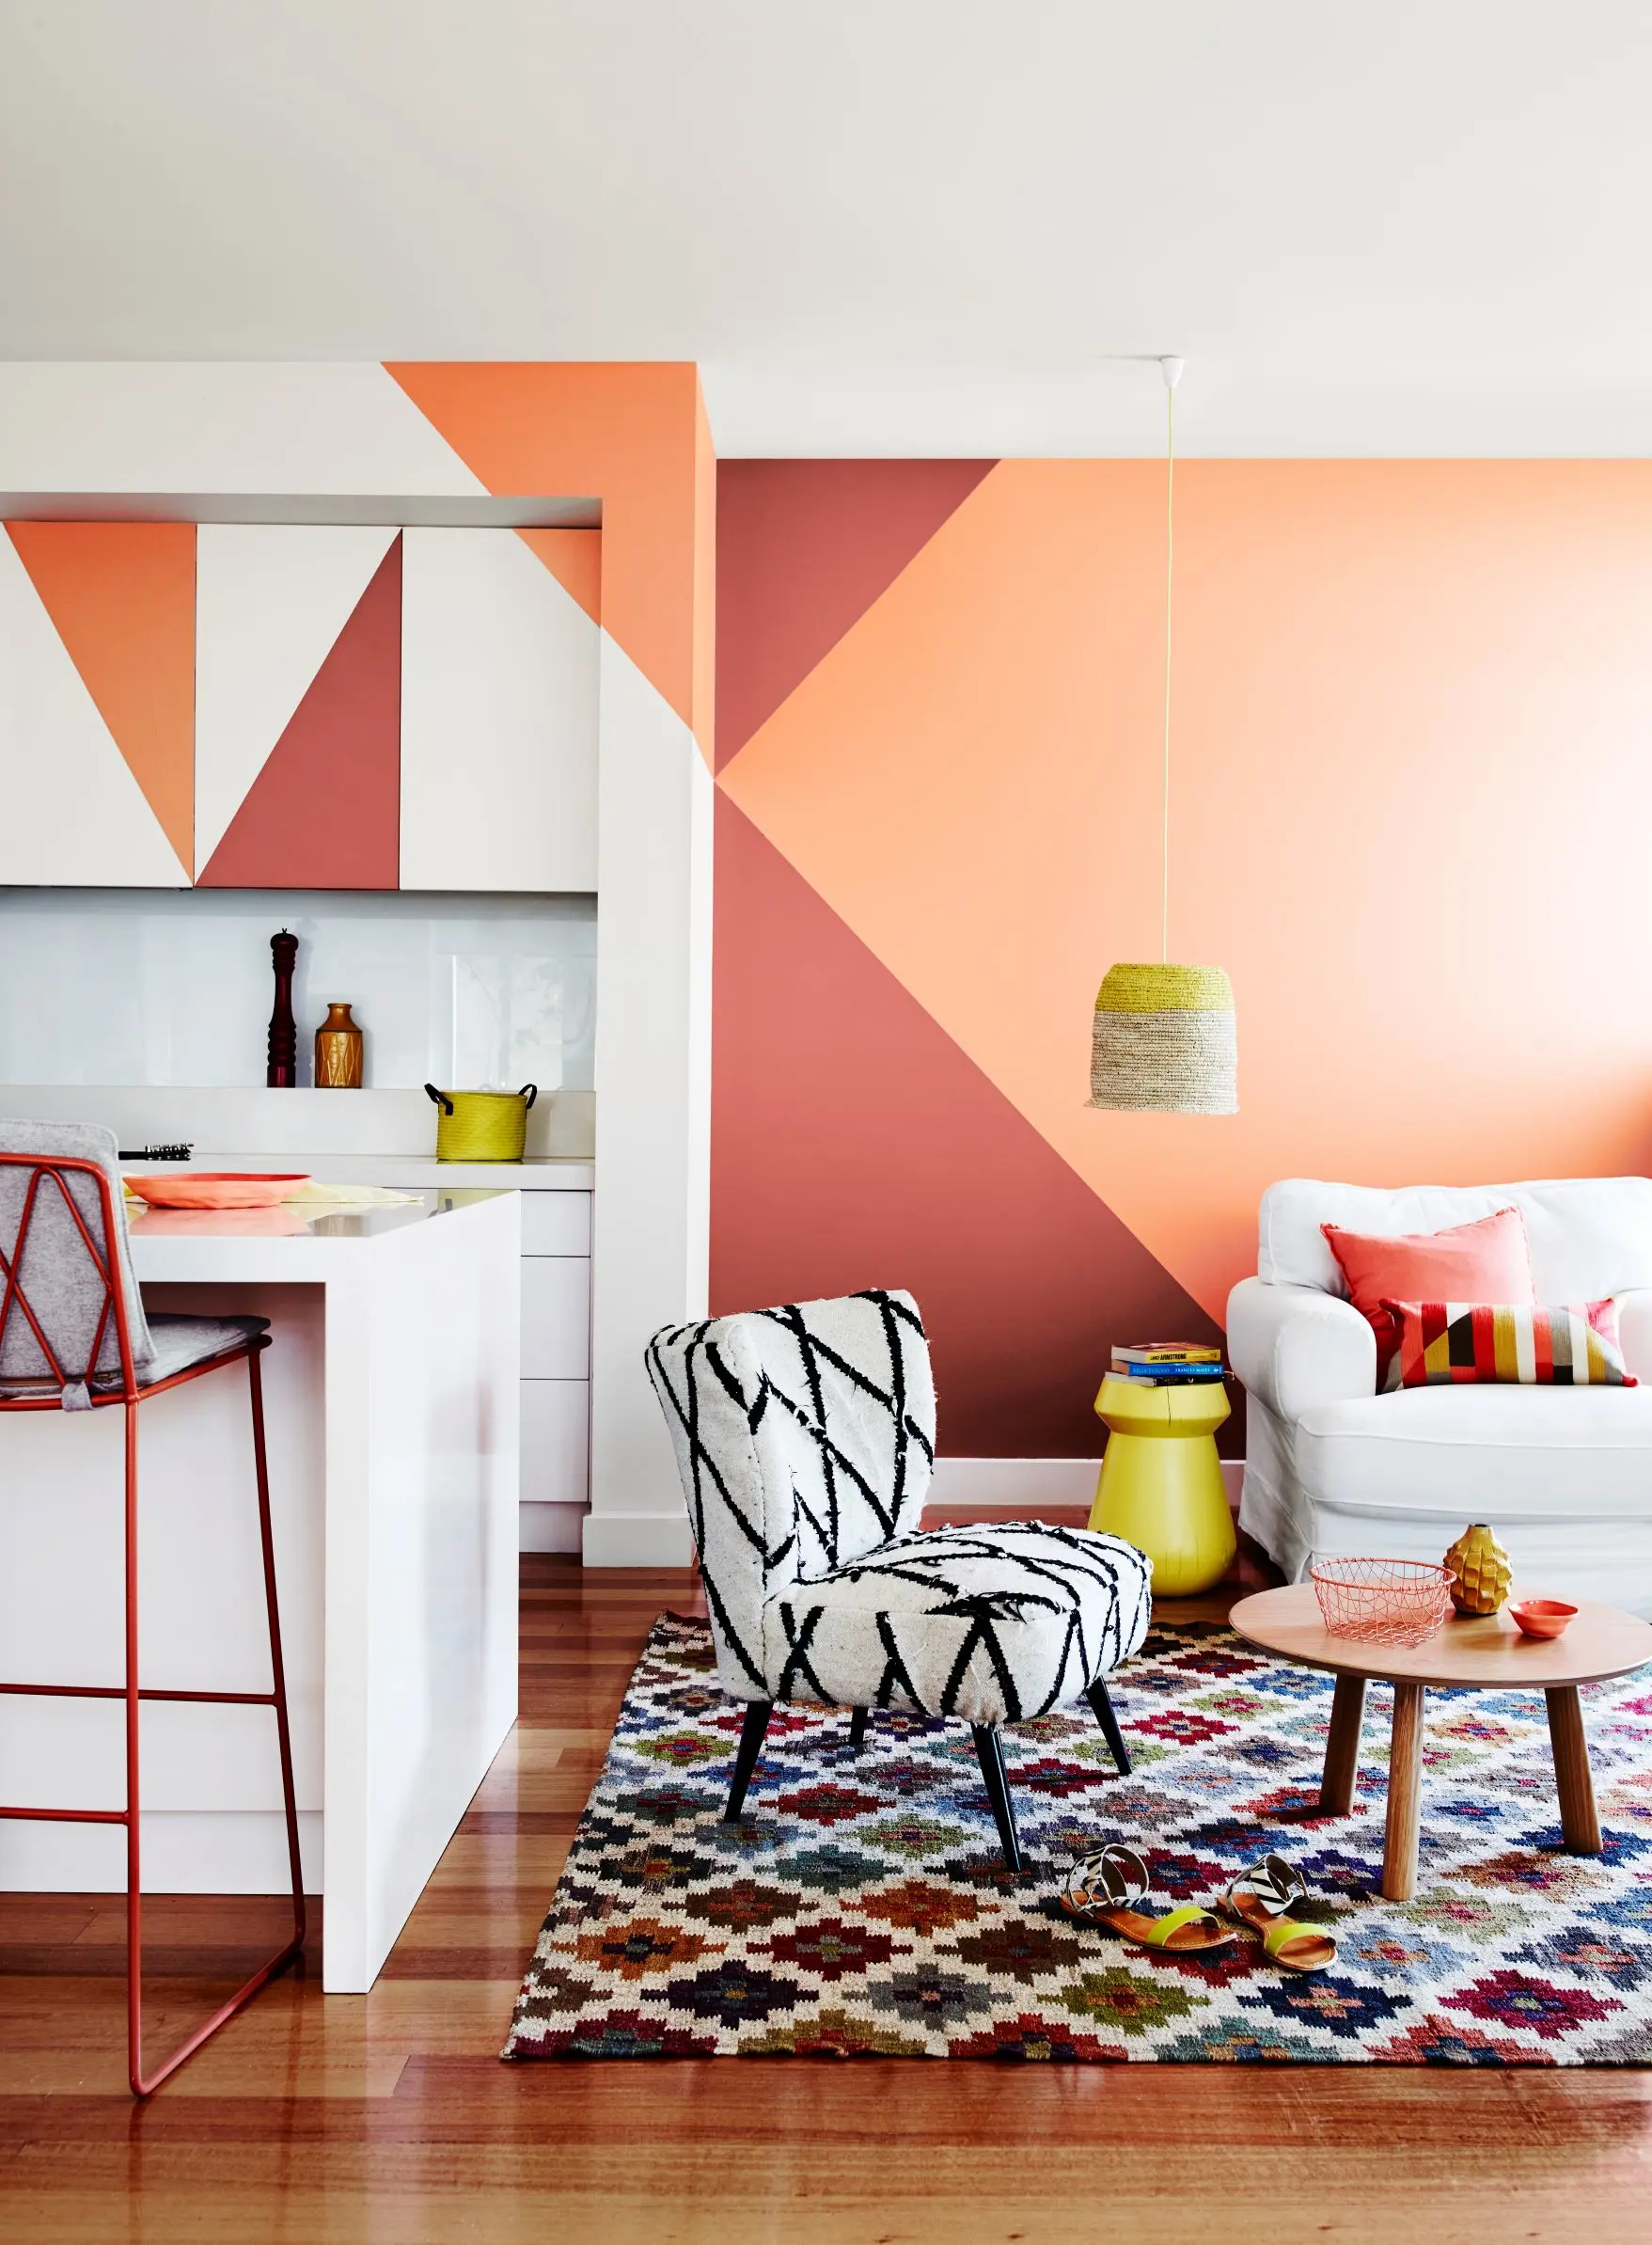 Red and orange interior feature wall with painted shapes